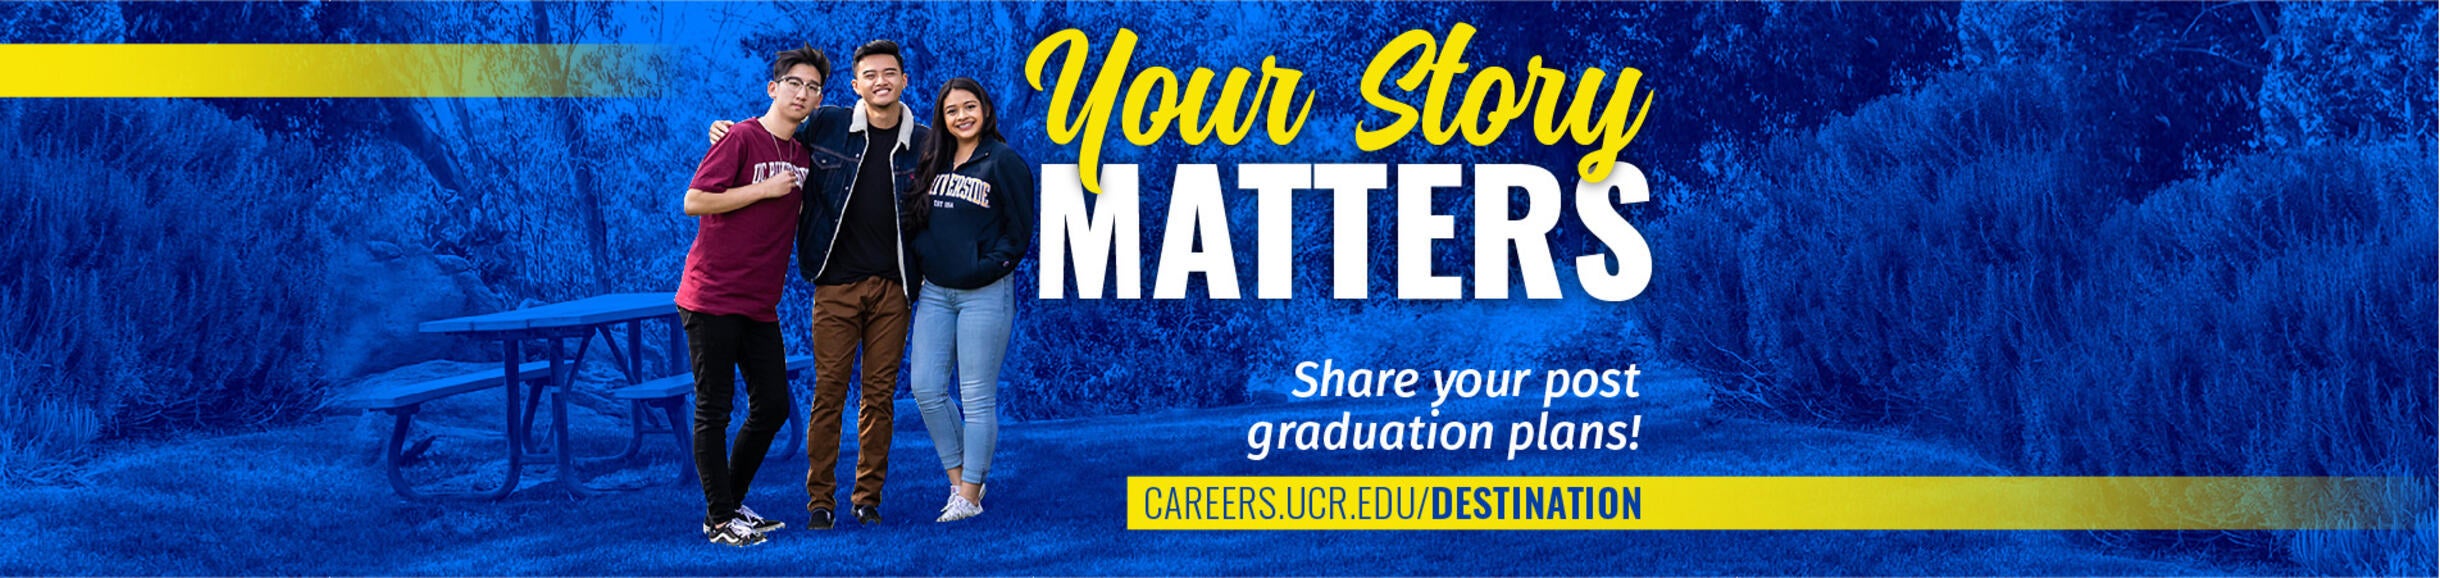 Your Story Matters! Share your post graduation plans - take the survey!